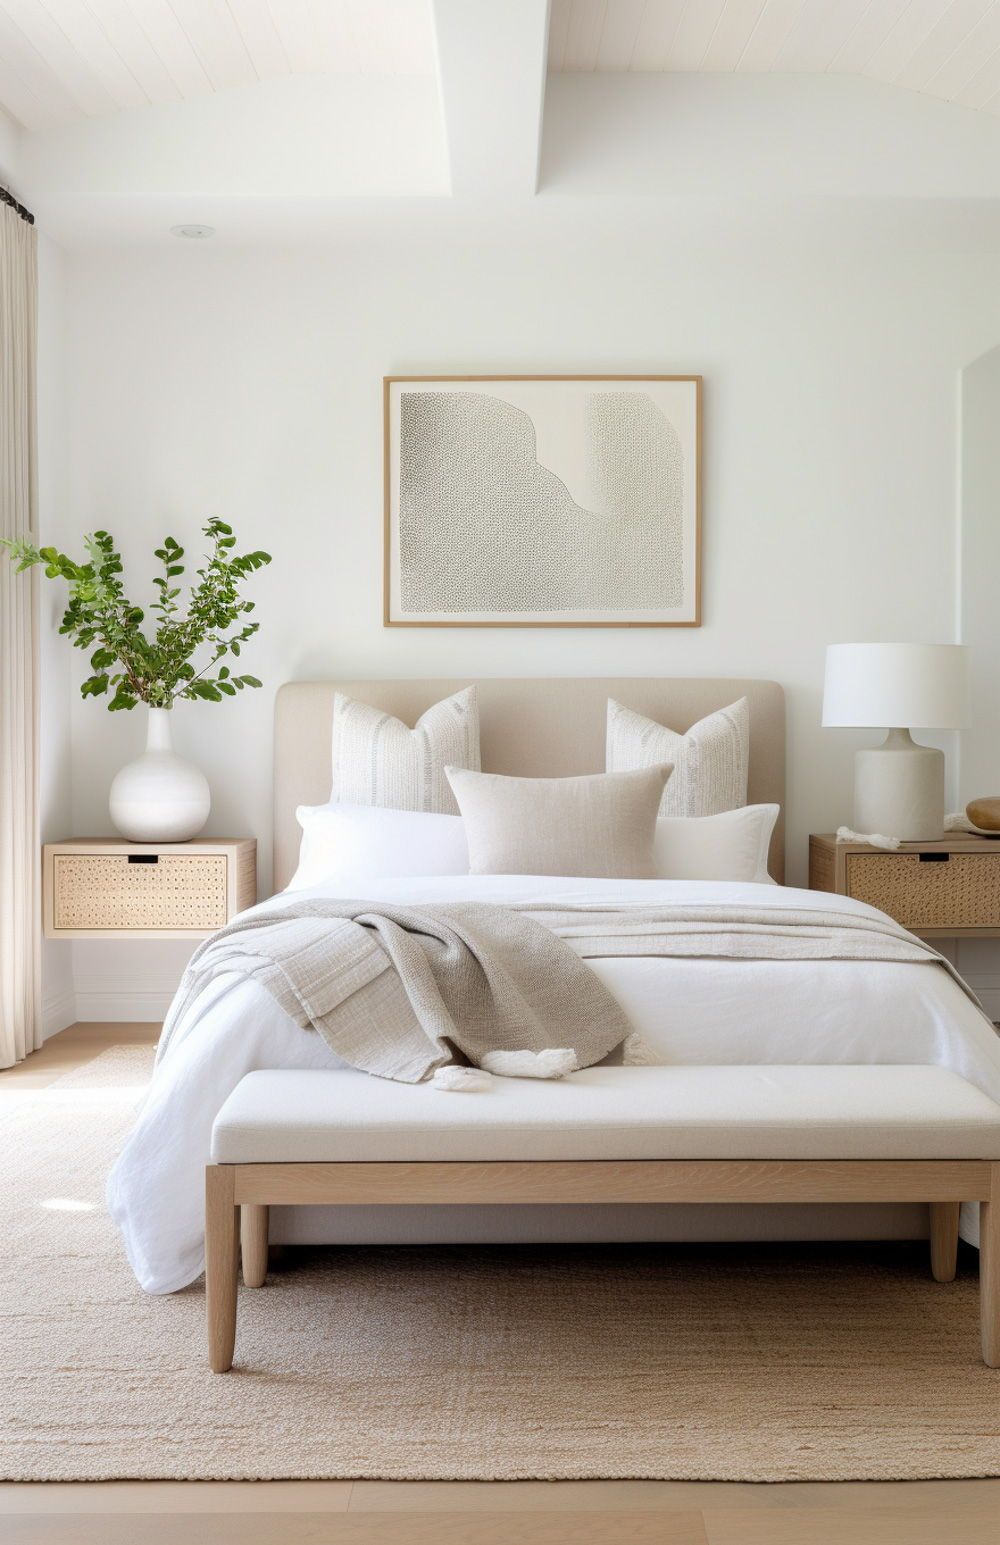 Bedroom Interior 5 Tips for Creating a Stunning Personal Sanctuary at Home